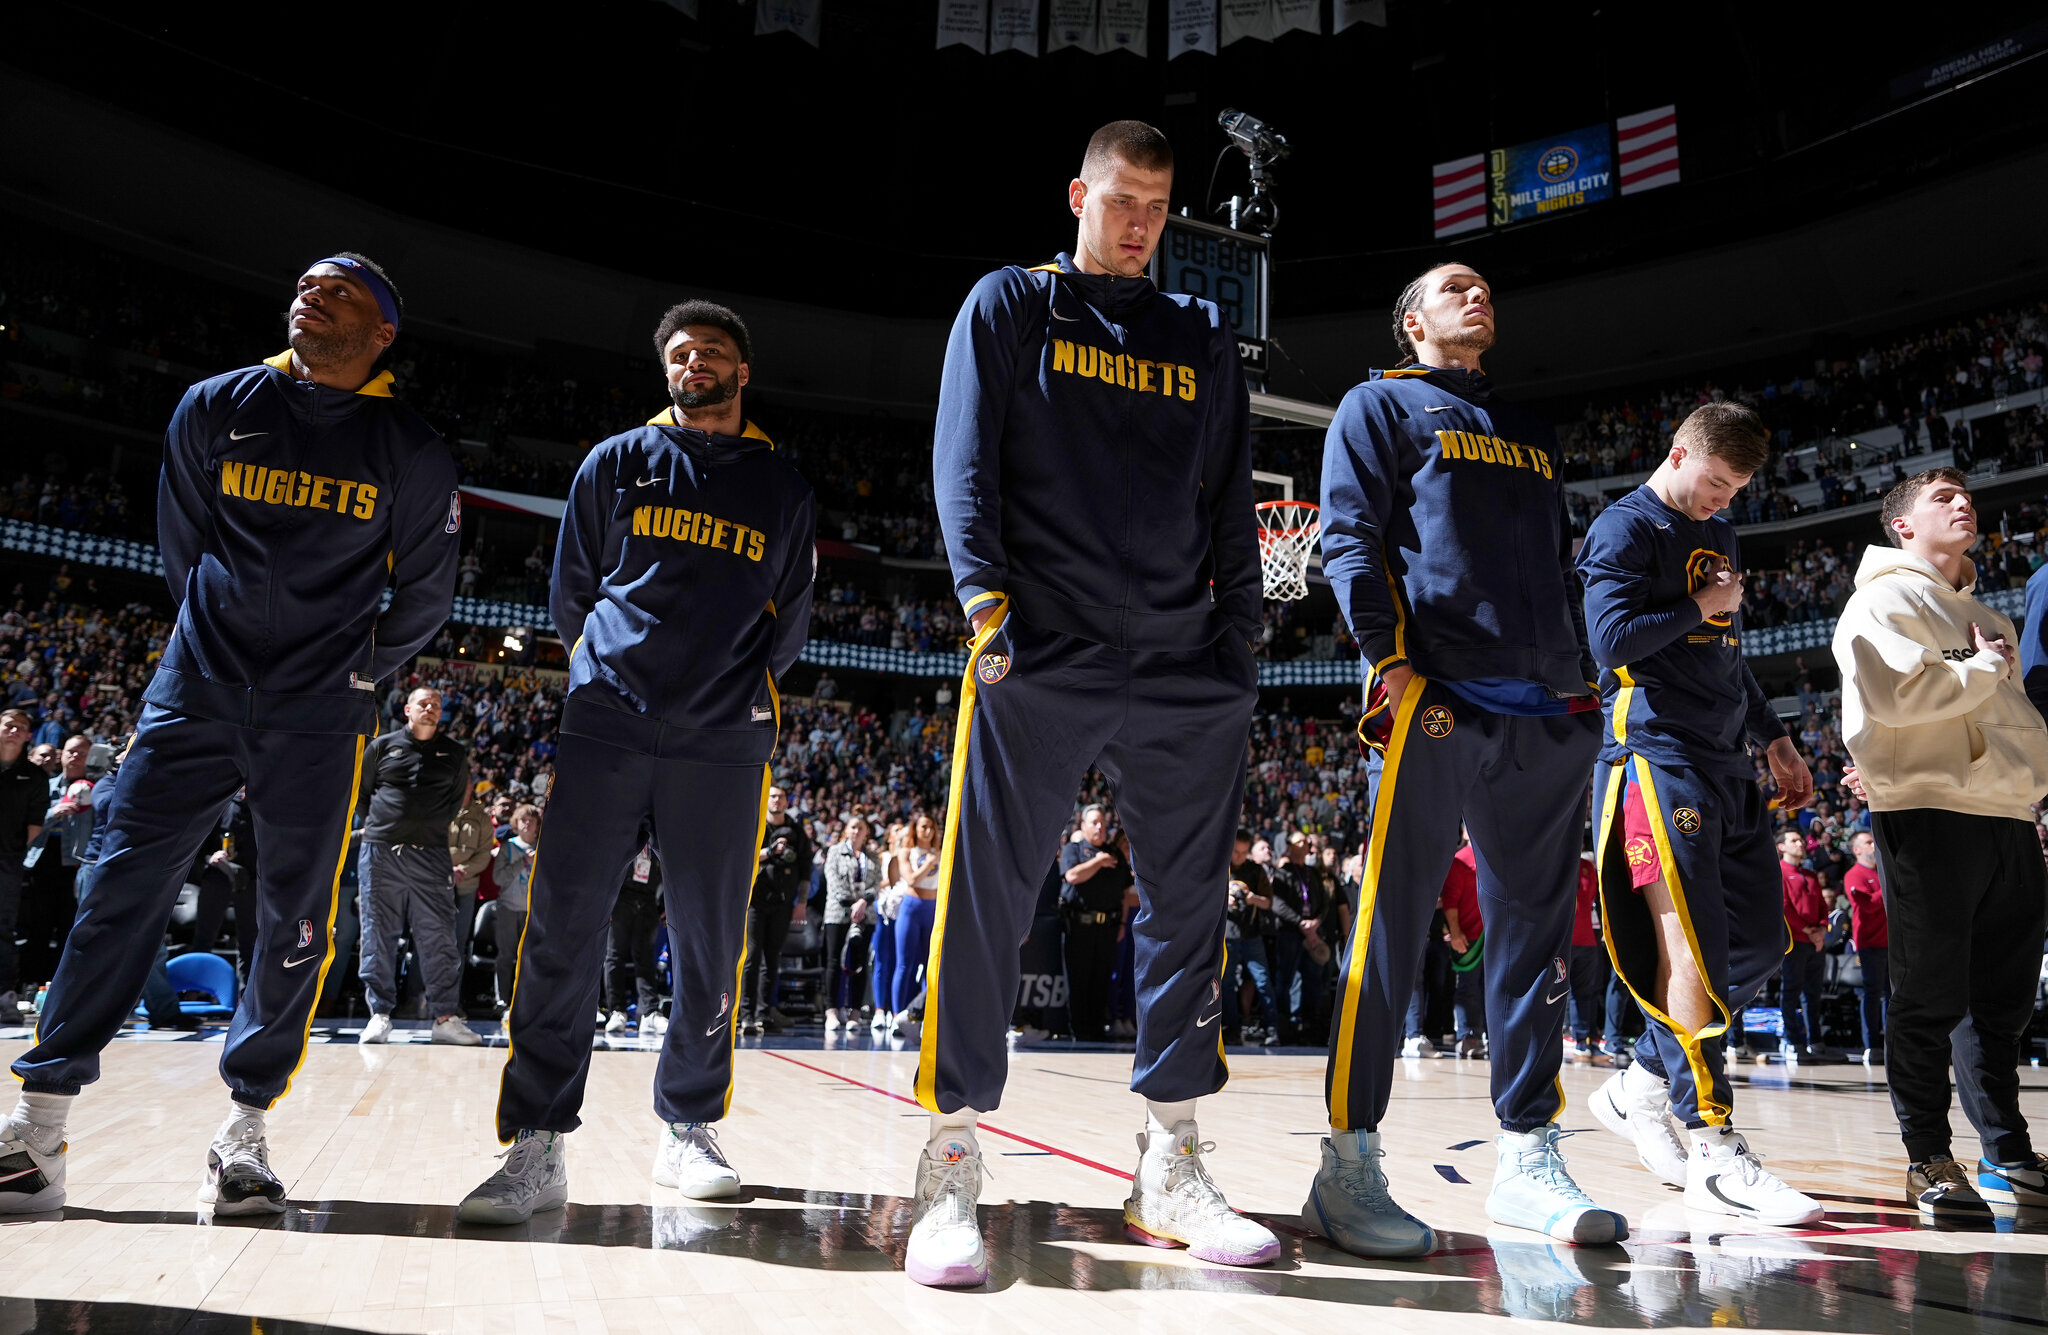 Outstanding Comeback: Denver Nuggets and Indiana Pacers Battle To Even the Score in Playoff Series